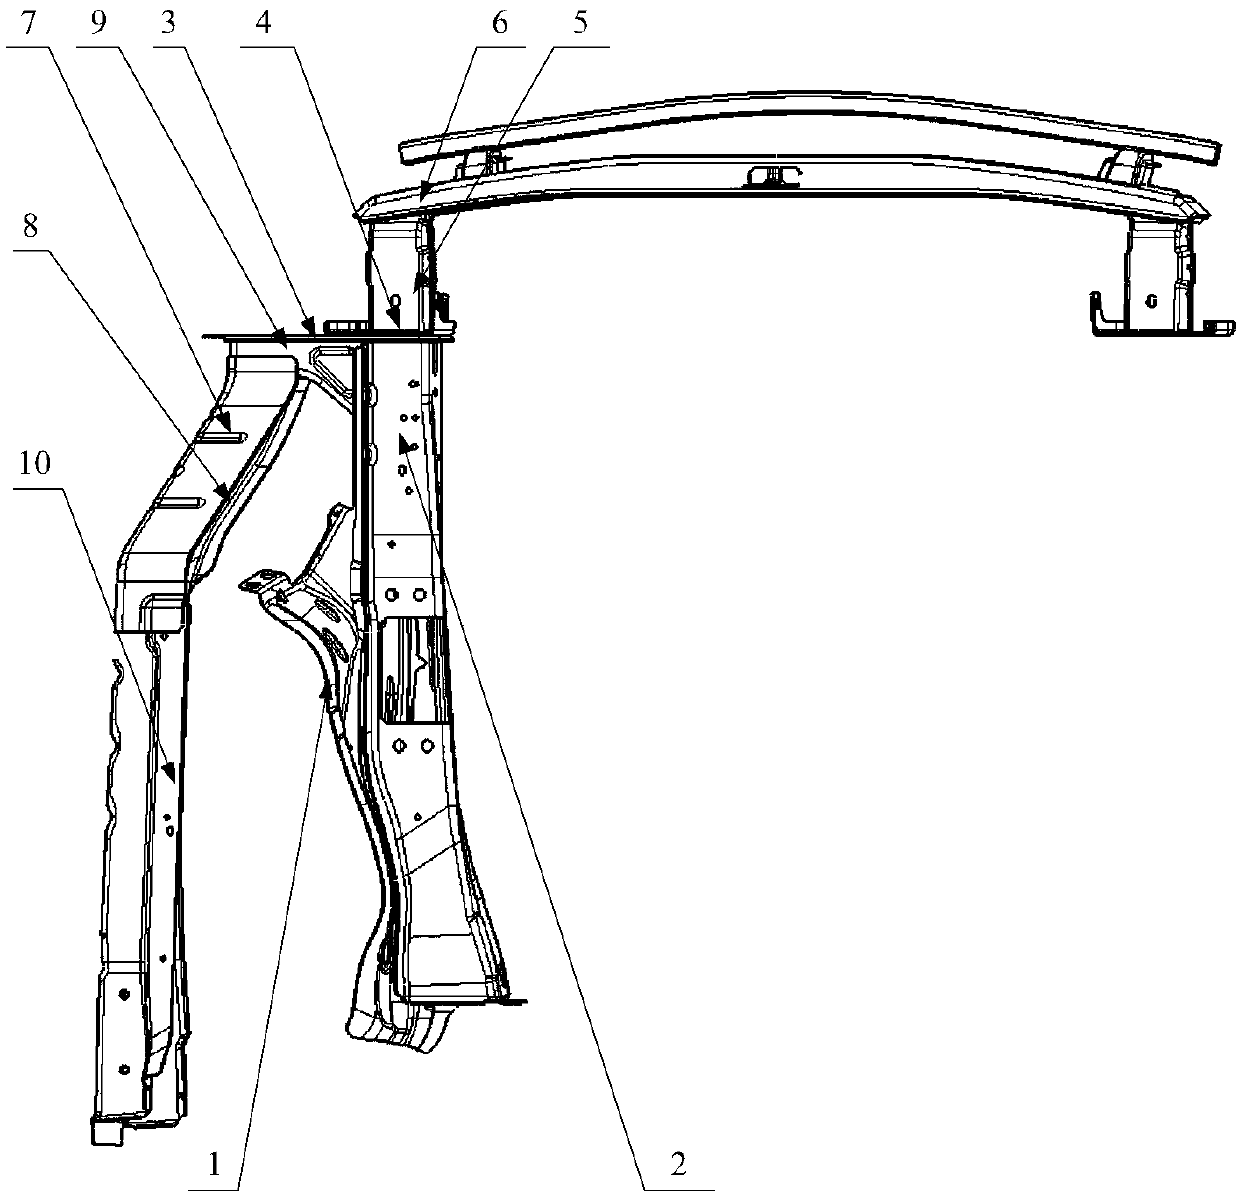 Vehicle and body structure thereof